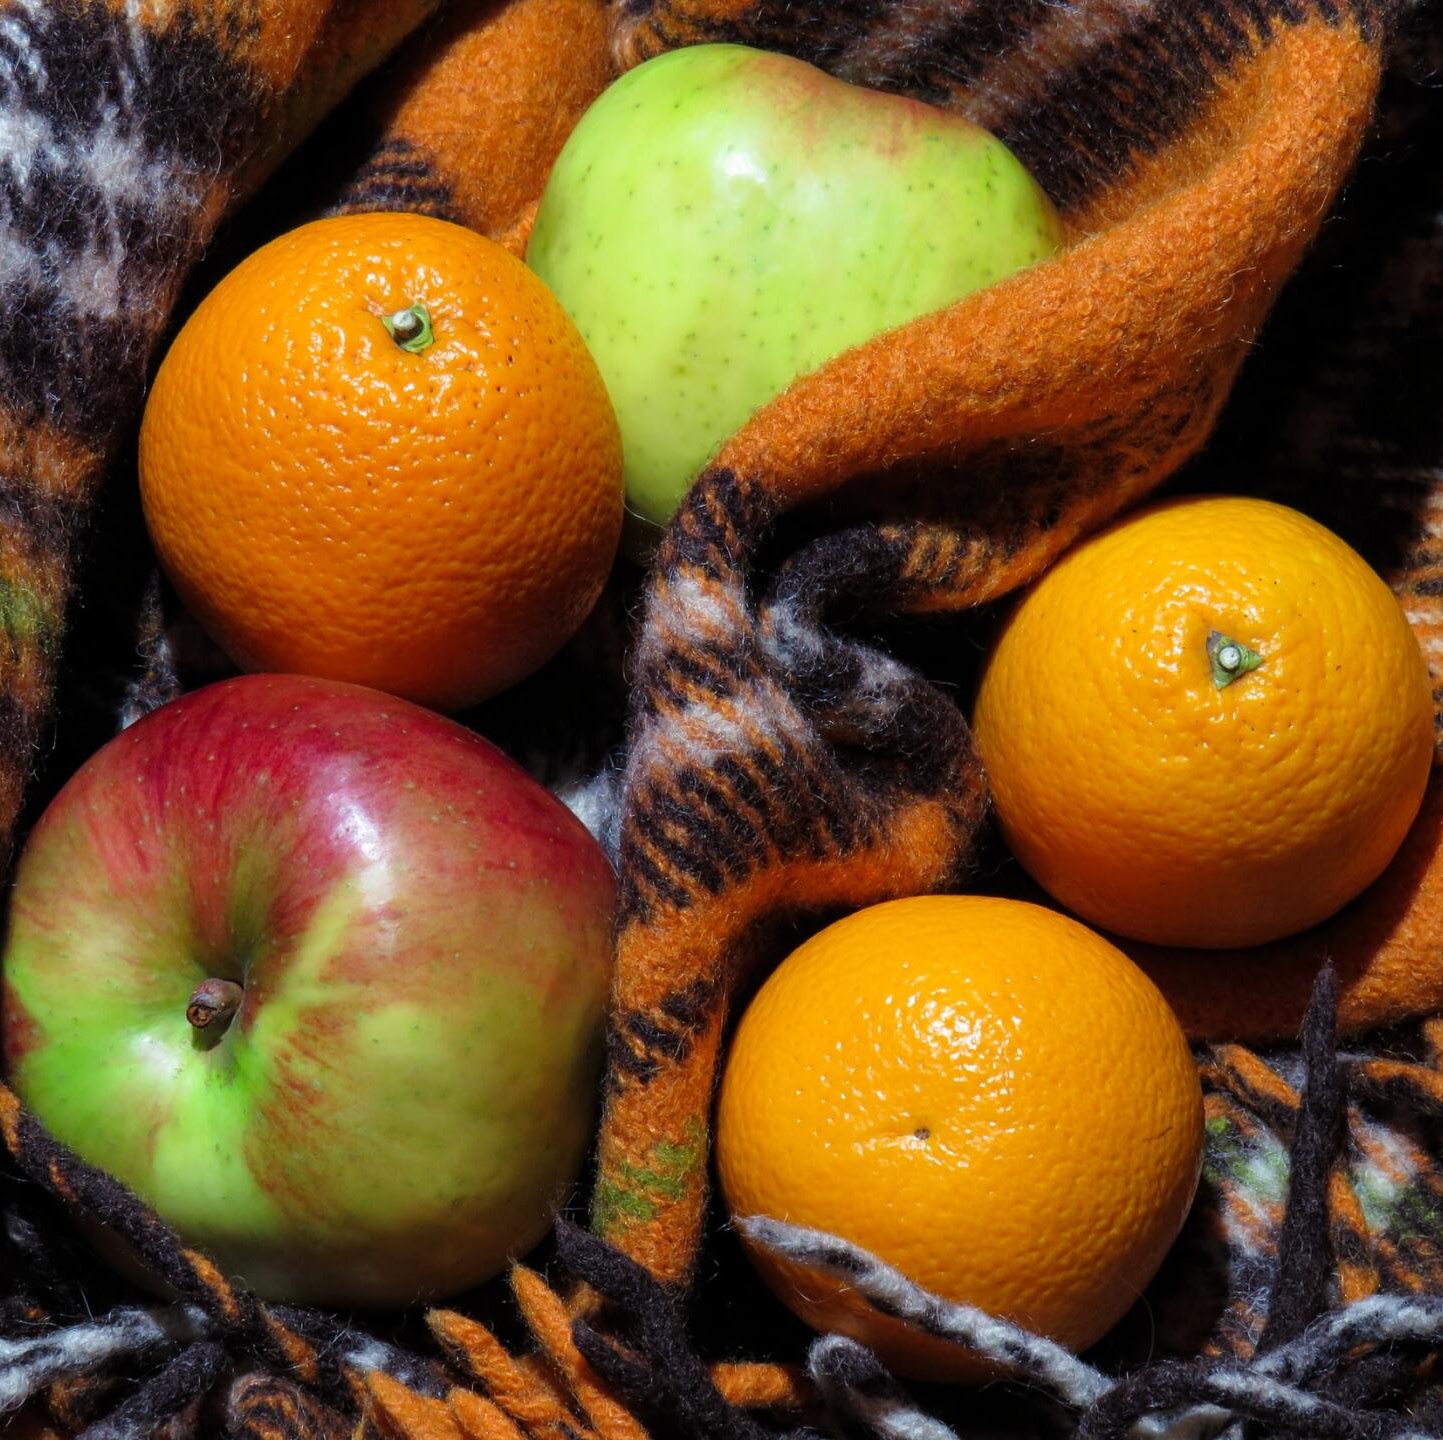 Photograph of some apples and oranges lying on tartan blanket